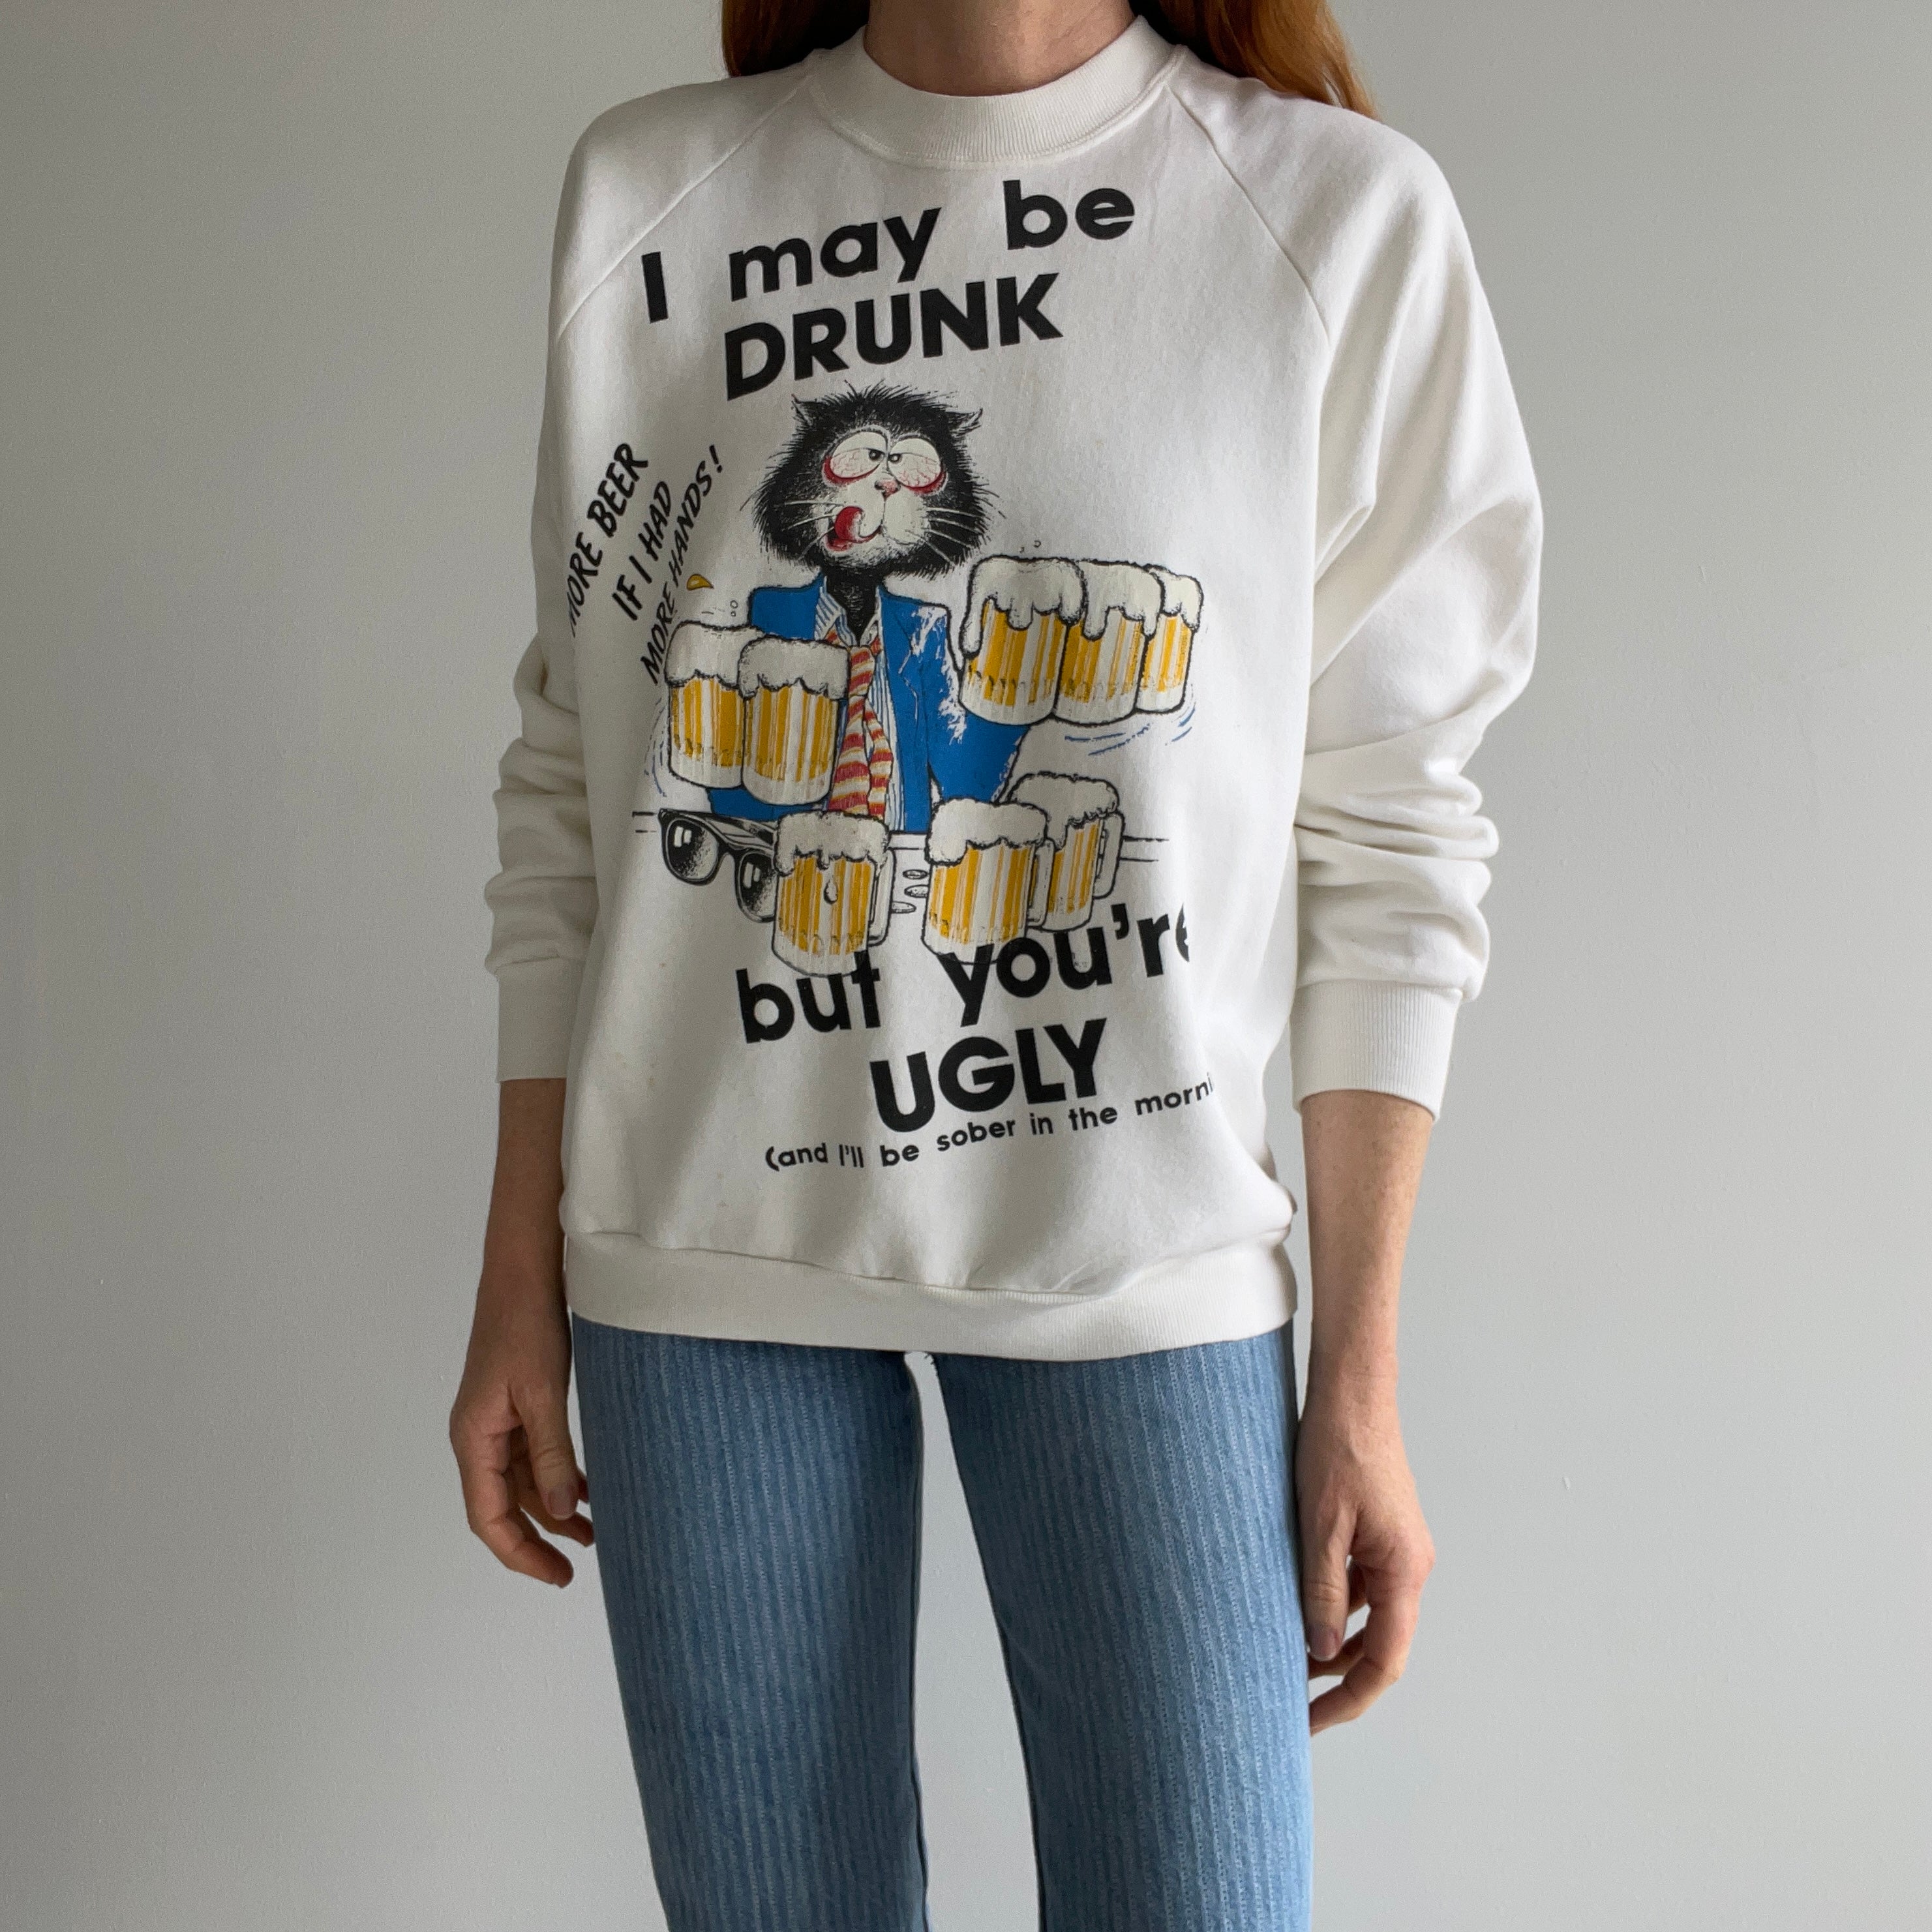 1980s Highly Inappropriate, Rude and Mean Sweatshirt You Shouldn't Buy